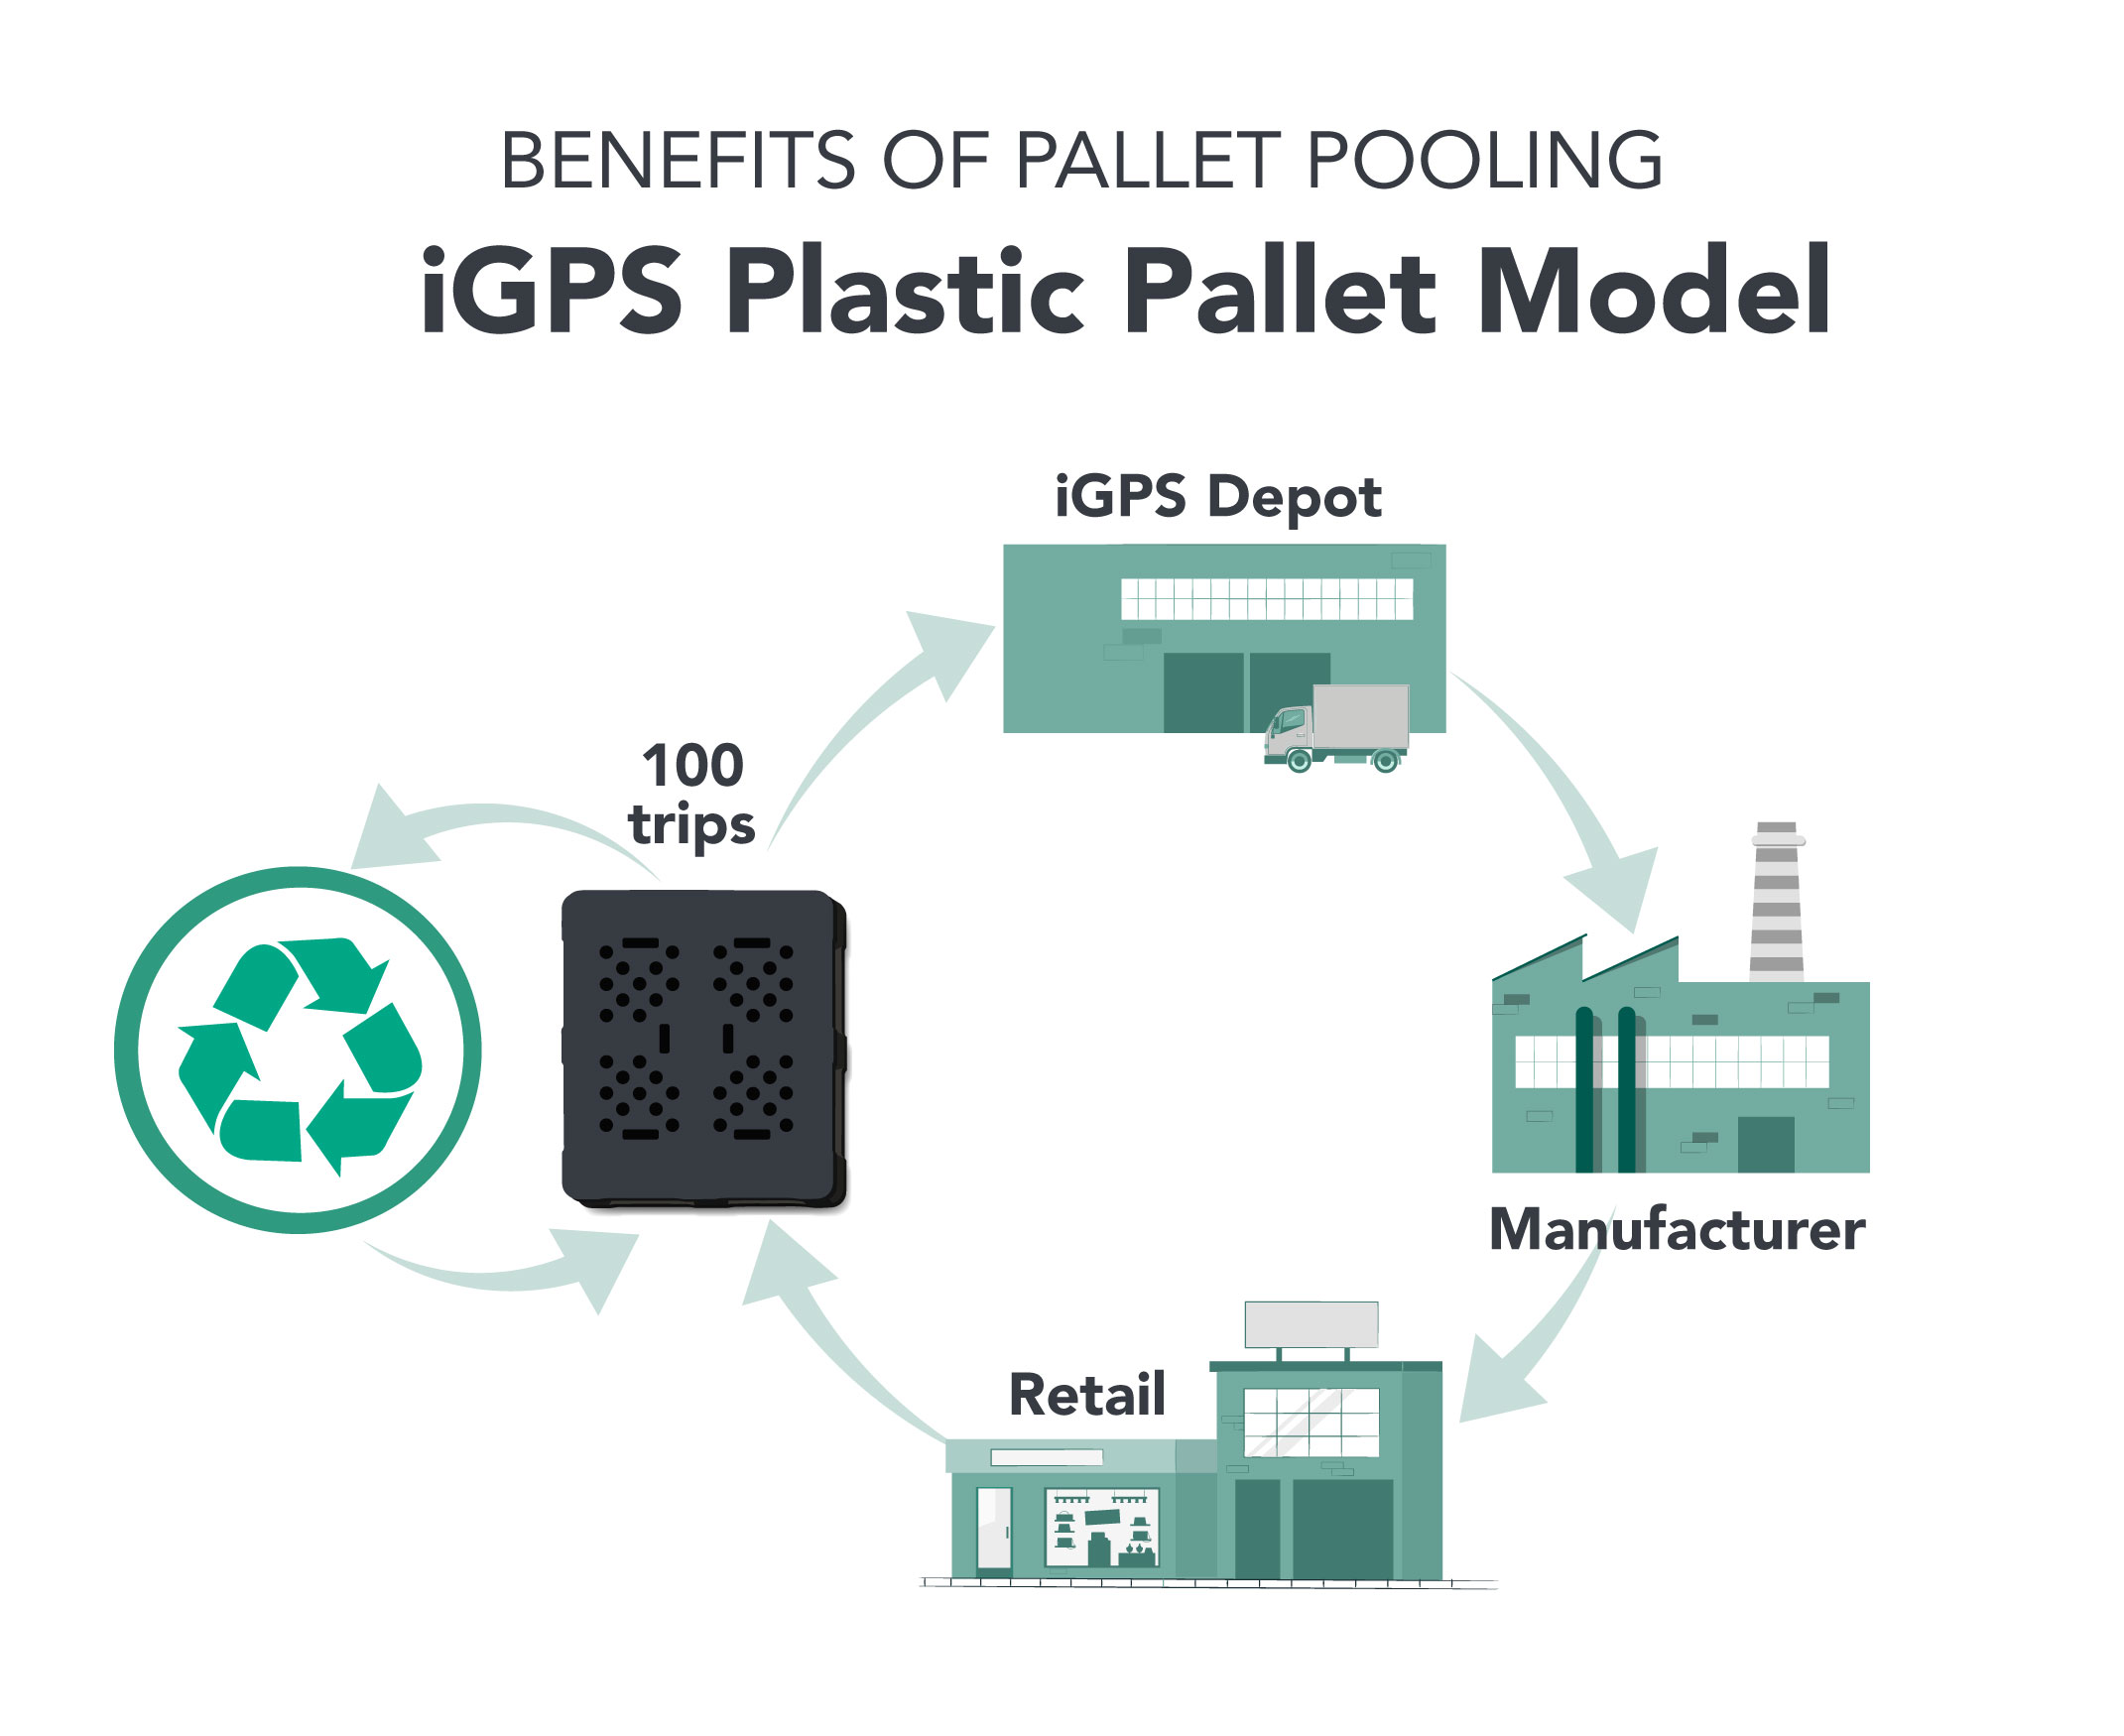 iGPS-Blog-How-to-Dispose-of-pallets-plastic-pallet-model diagram, 100% recyclable